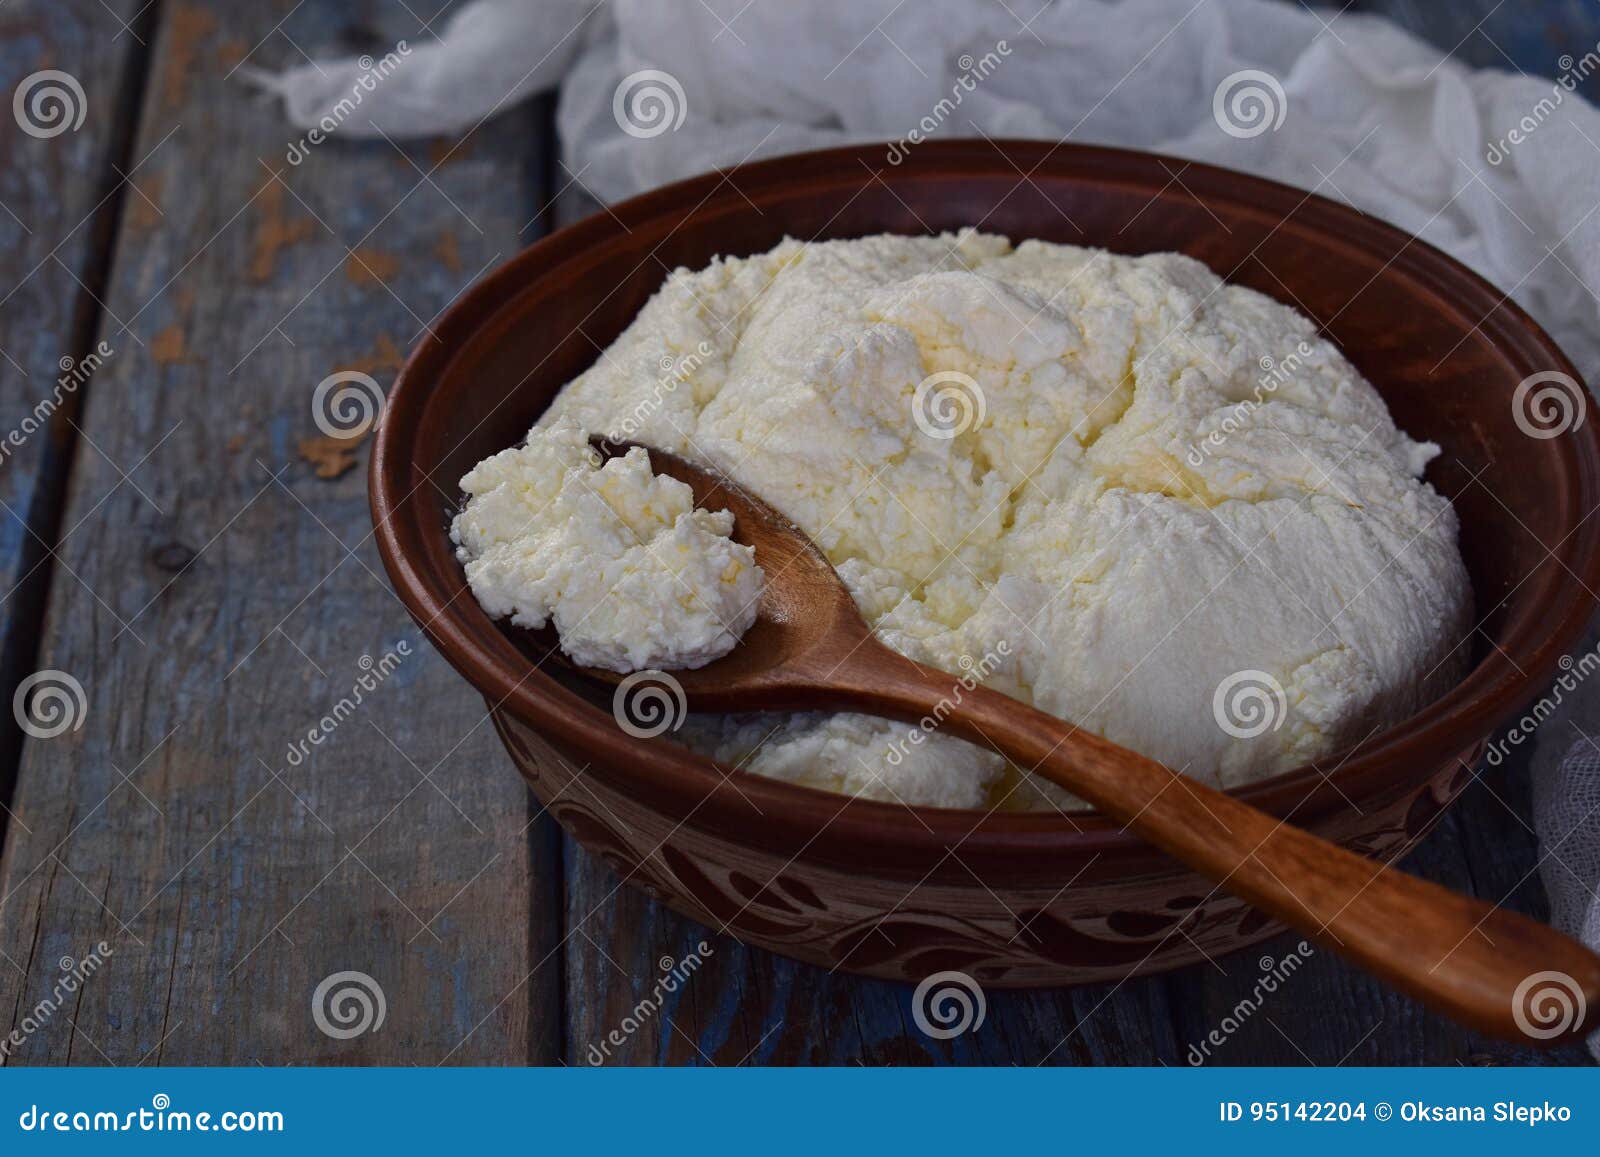 Cottage Cheese From Curdled Milk Or Yoghurt In A Clay Bowl On A